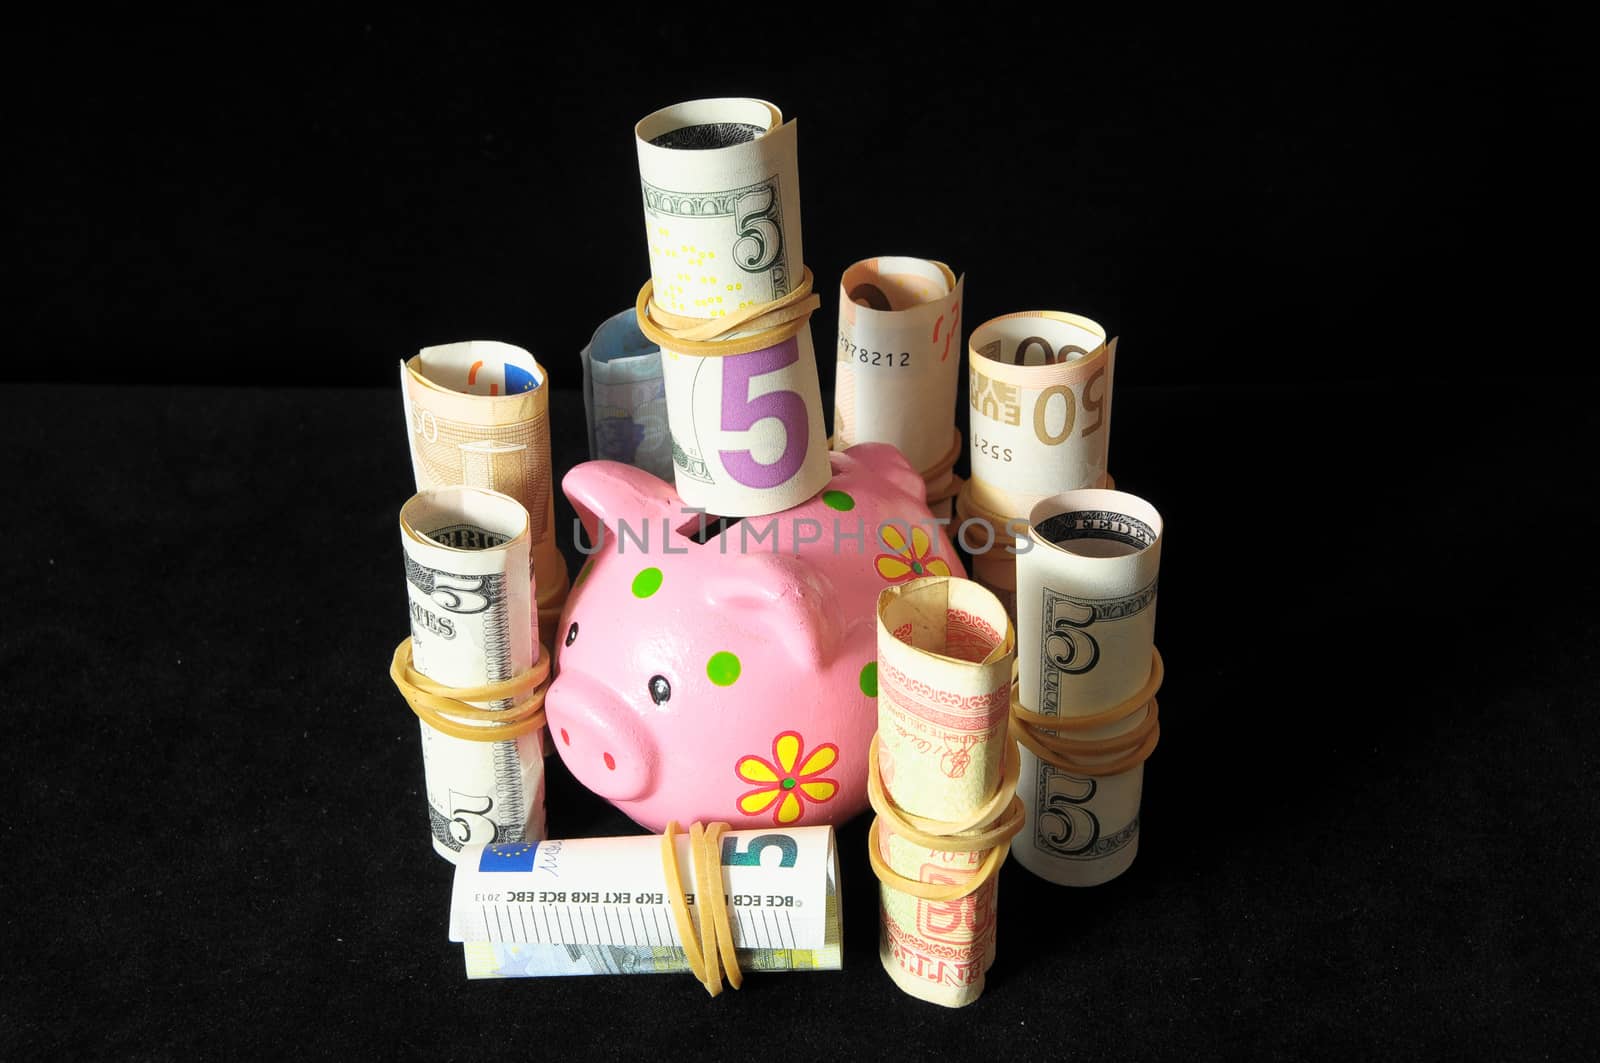 Save Money with One Pink Pig Piggy Bank